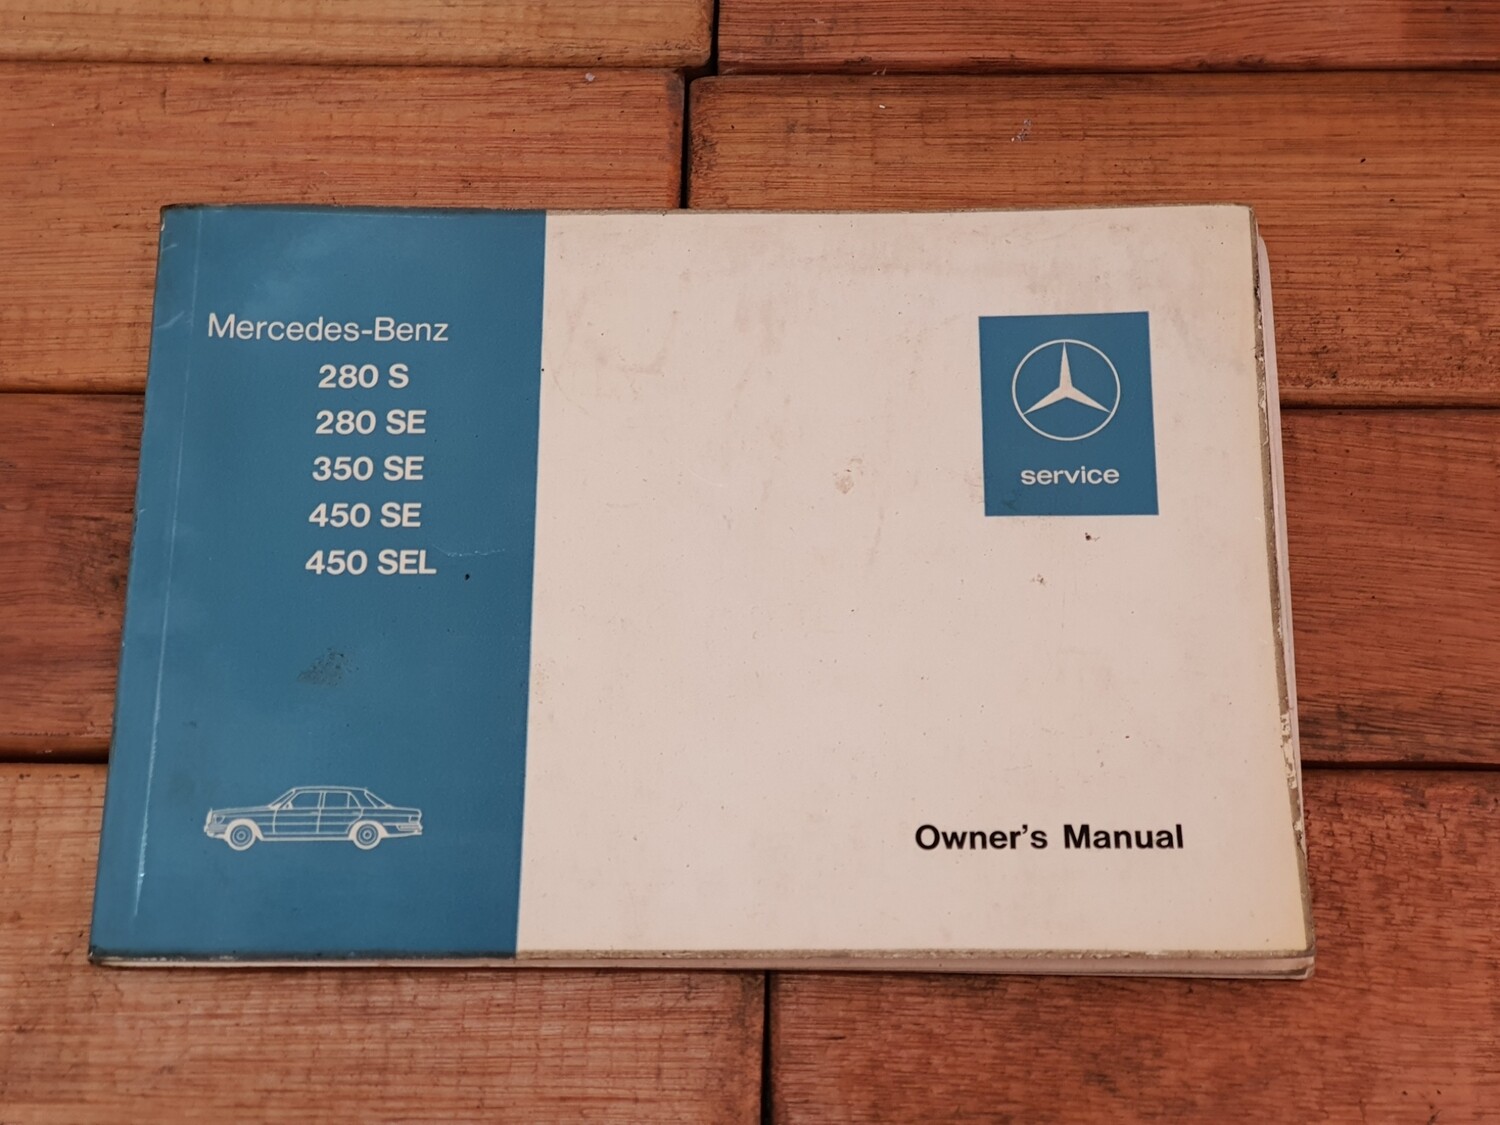 Mercedes-Benz owners manual (W116)